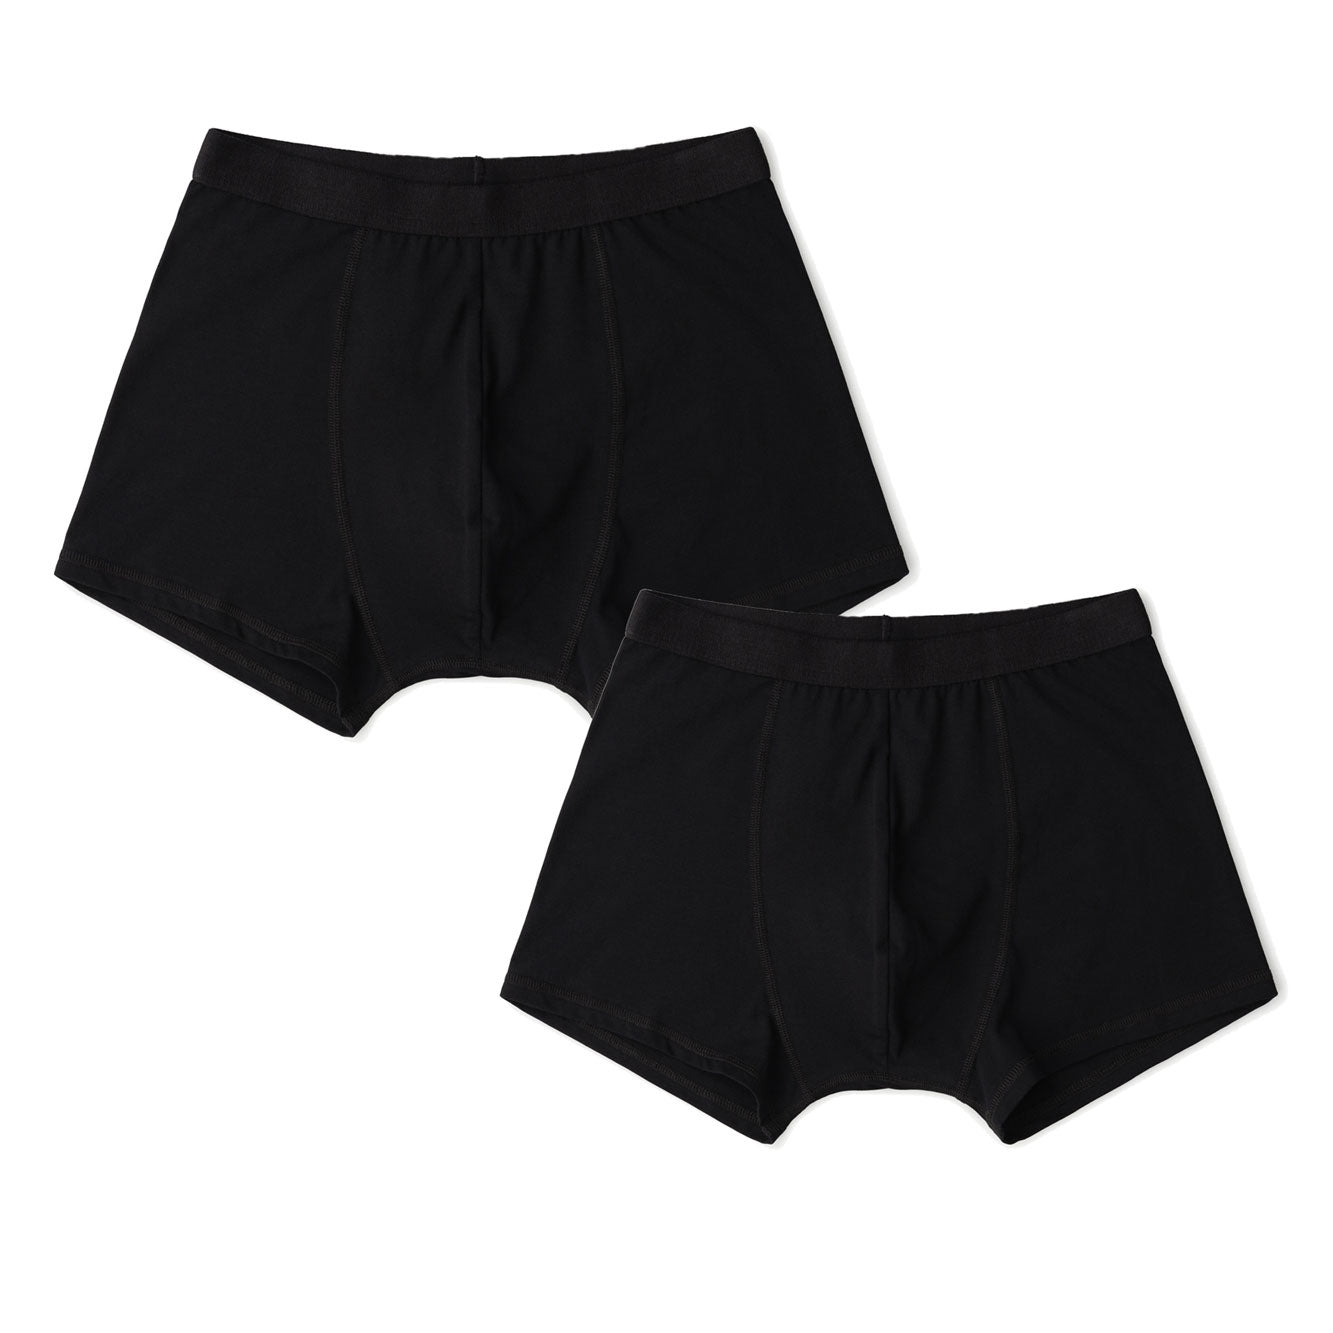 Black Organic & Recycled cotton Boxer Briefs, first fit promise 2 pack